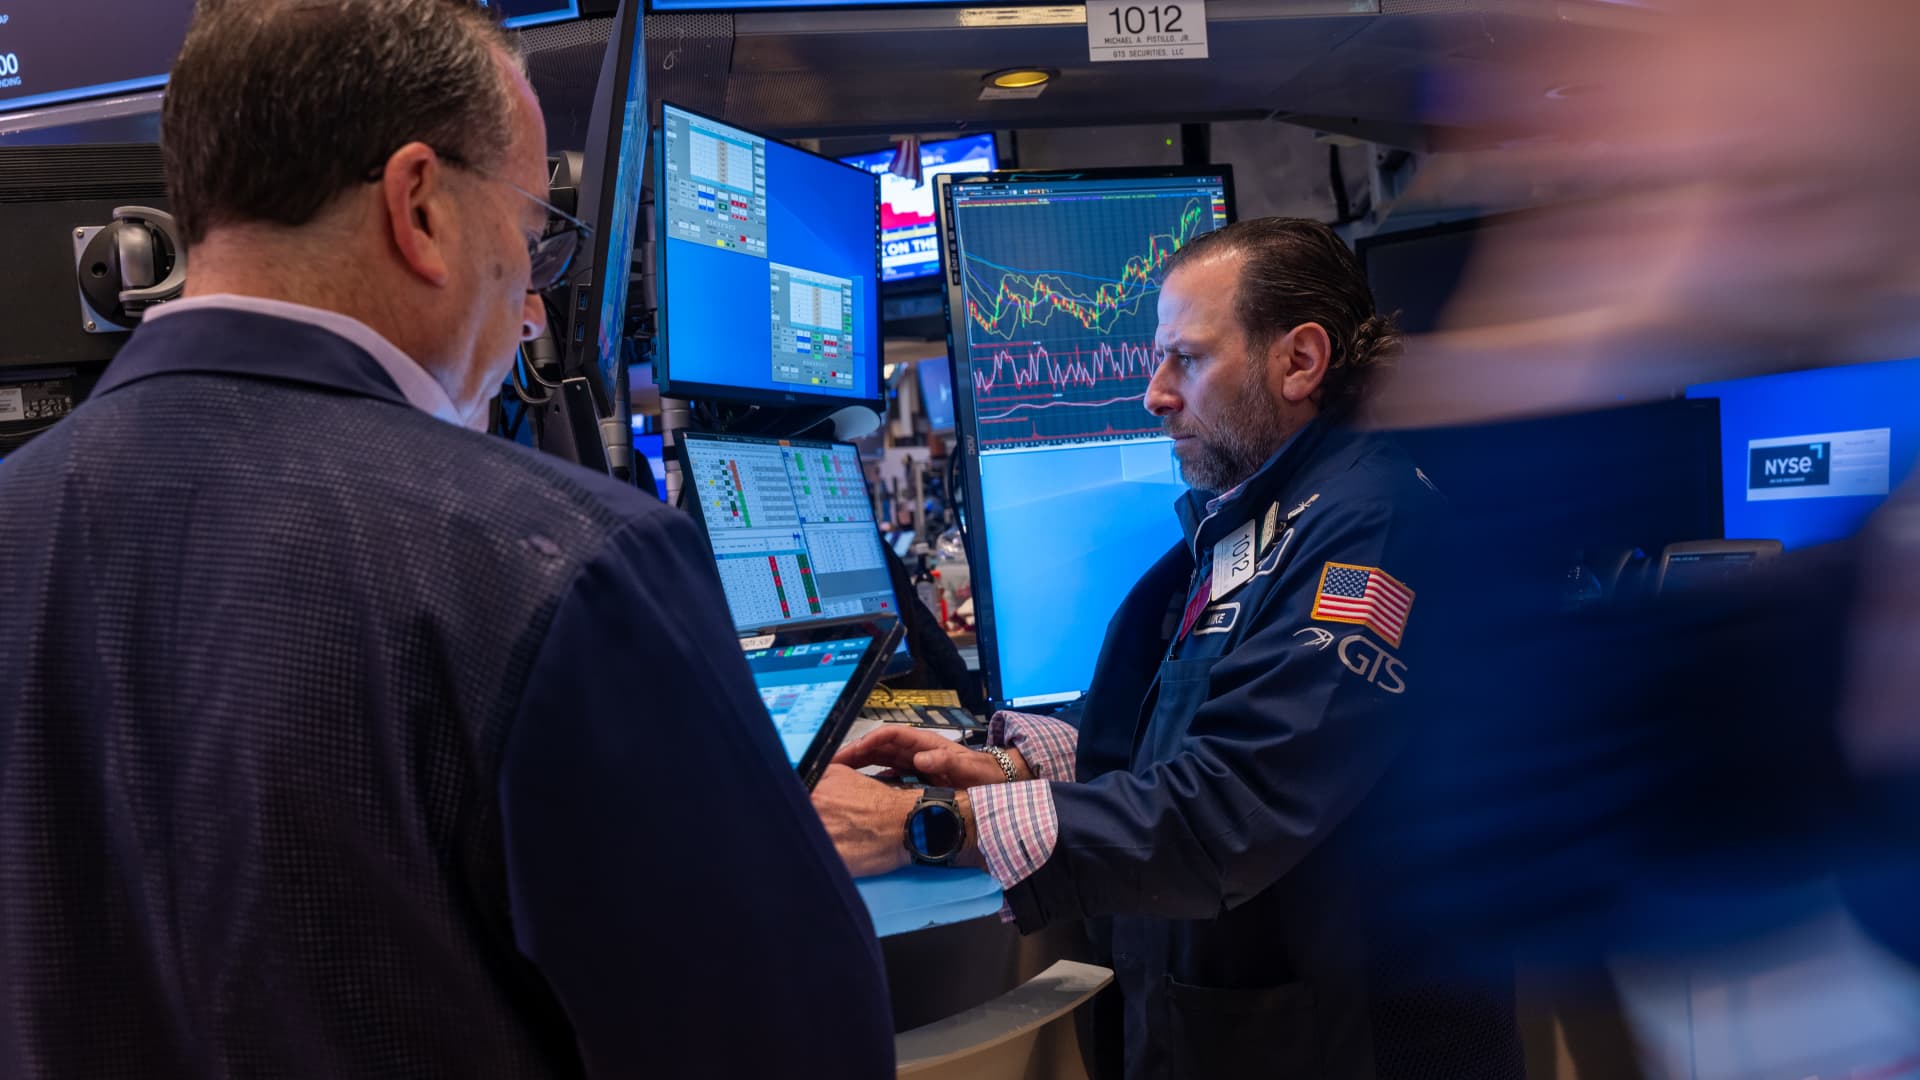 Stocks pop after Fed decision, oil plunges, earnings mixed — what to watch in the market